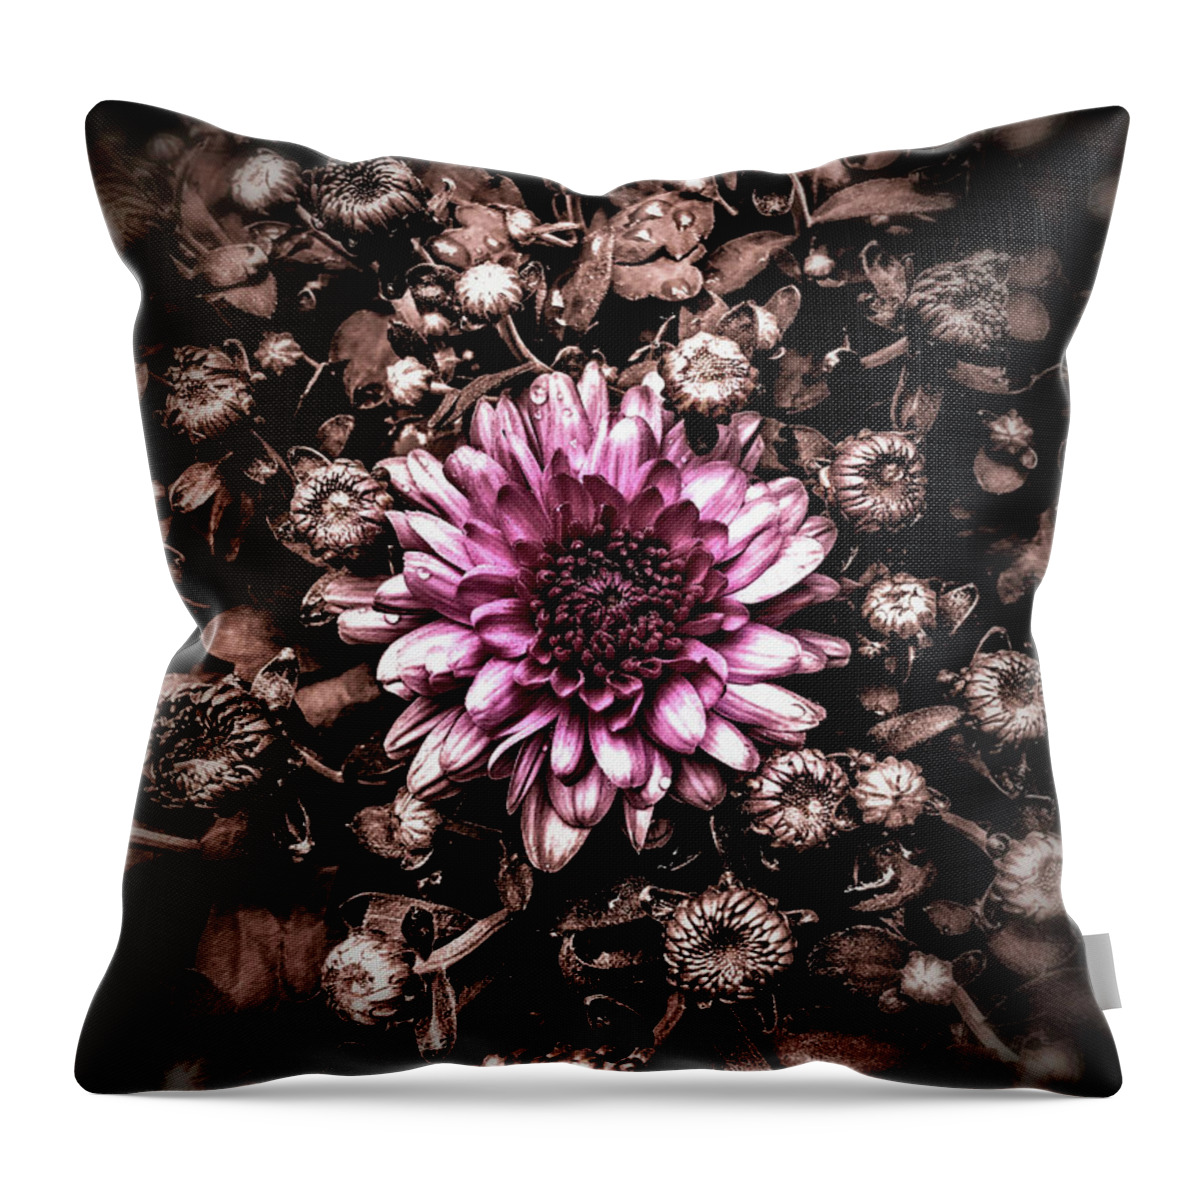  Throw Pillow featuring the pyrography Looking around-351 by Emilio Arostegui